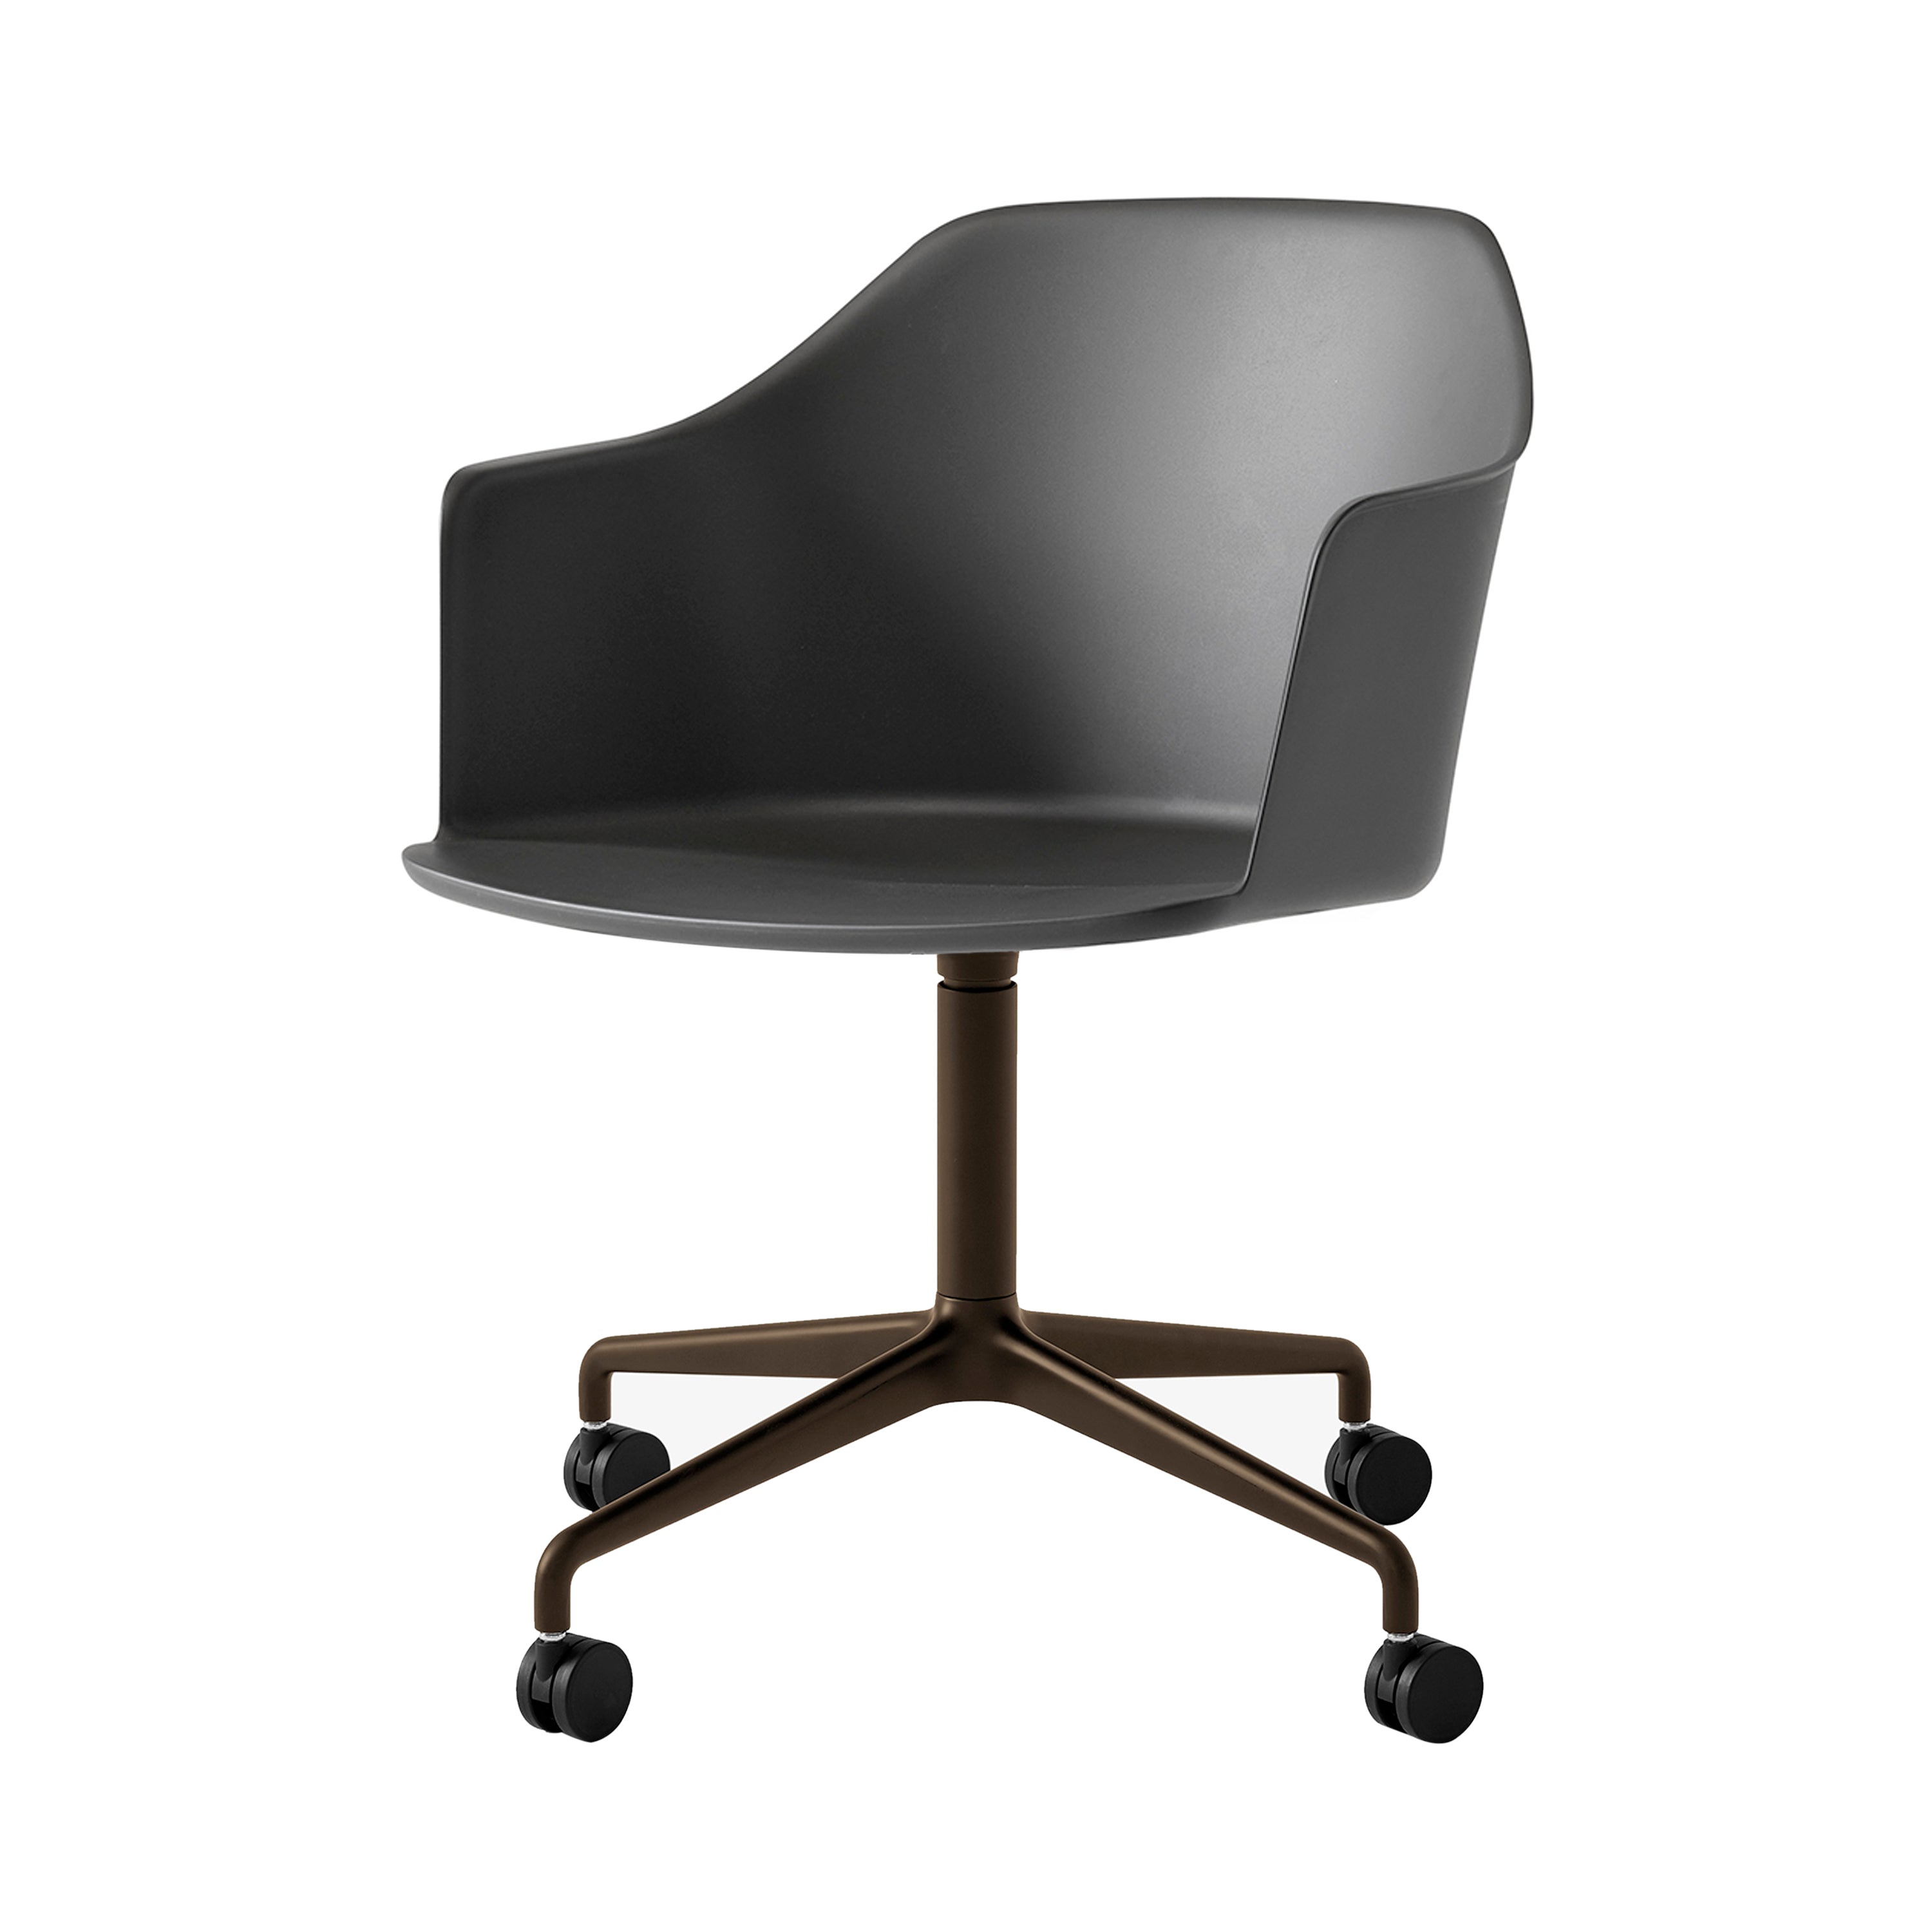 Rely Chair HW48: Black + Bronzed